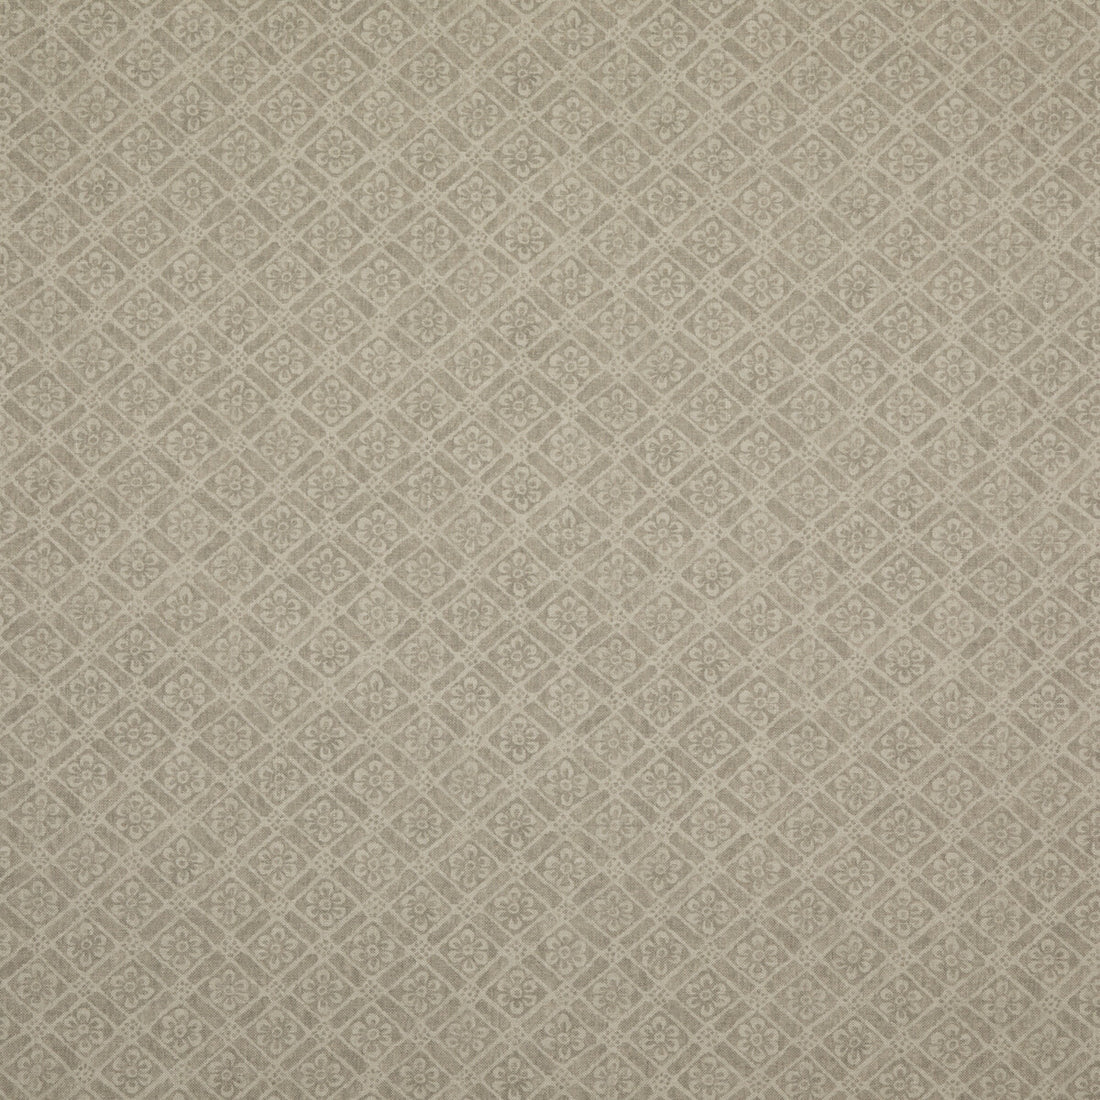 Moreton Trellis fabric in stone color - pattern BP10775.1.0 - by G P &amp; J Baker in the Signature Prints collection